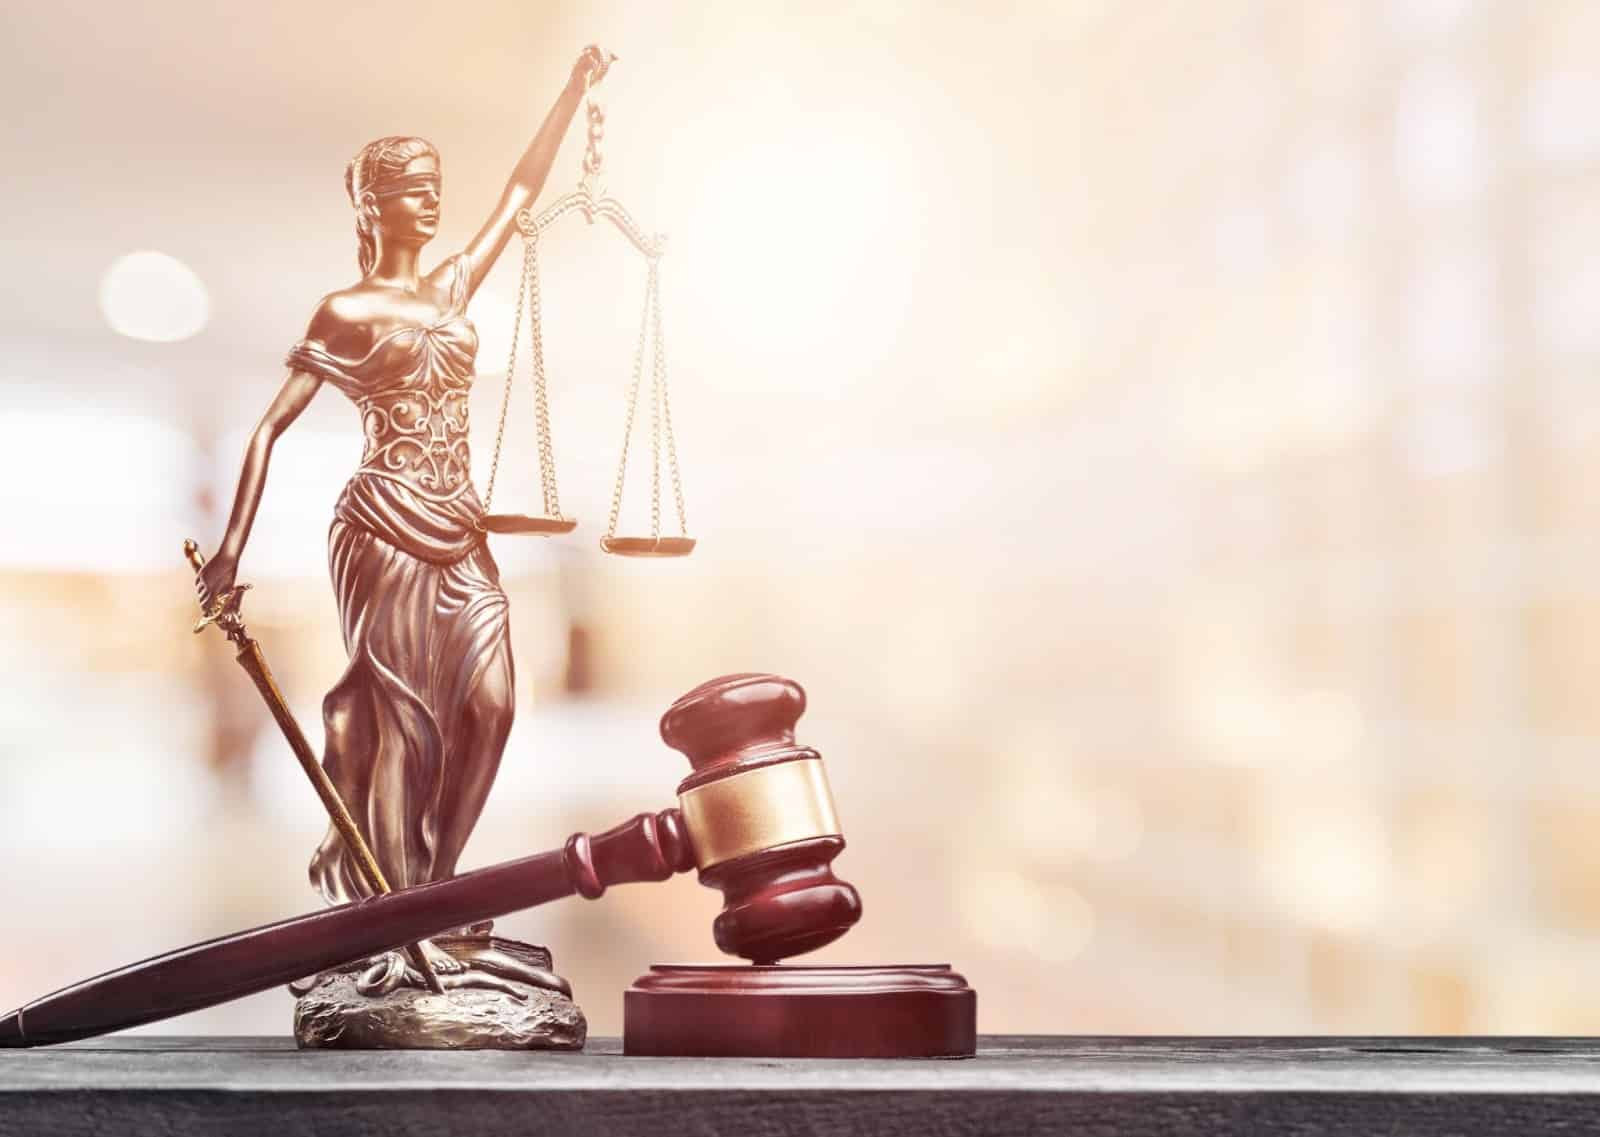 Image of small brass statuette of the Goddess of Justice holding scales and sword, and gavel sitting in foreground over blurred, bright background.